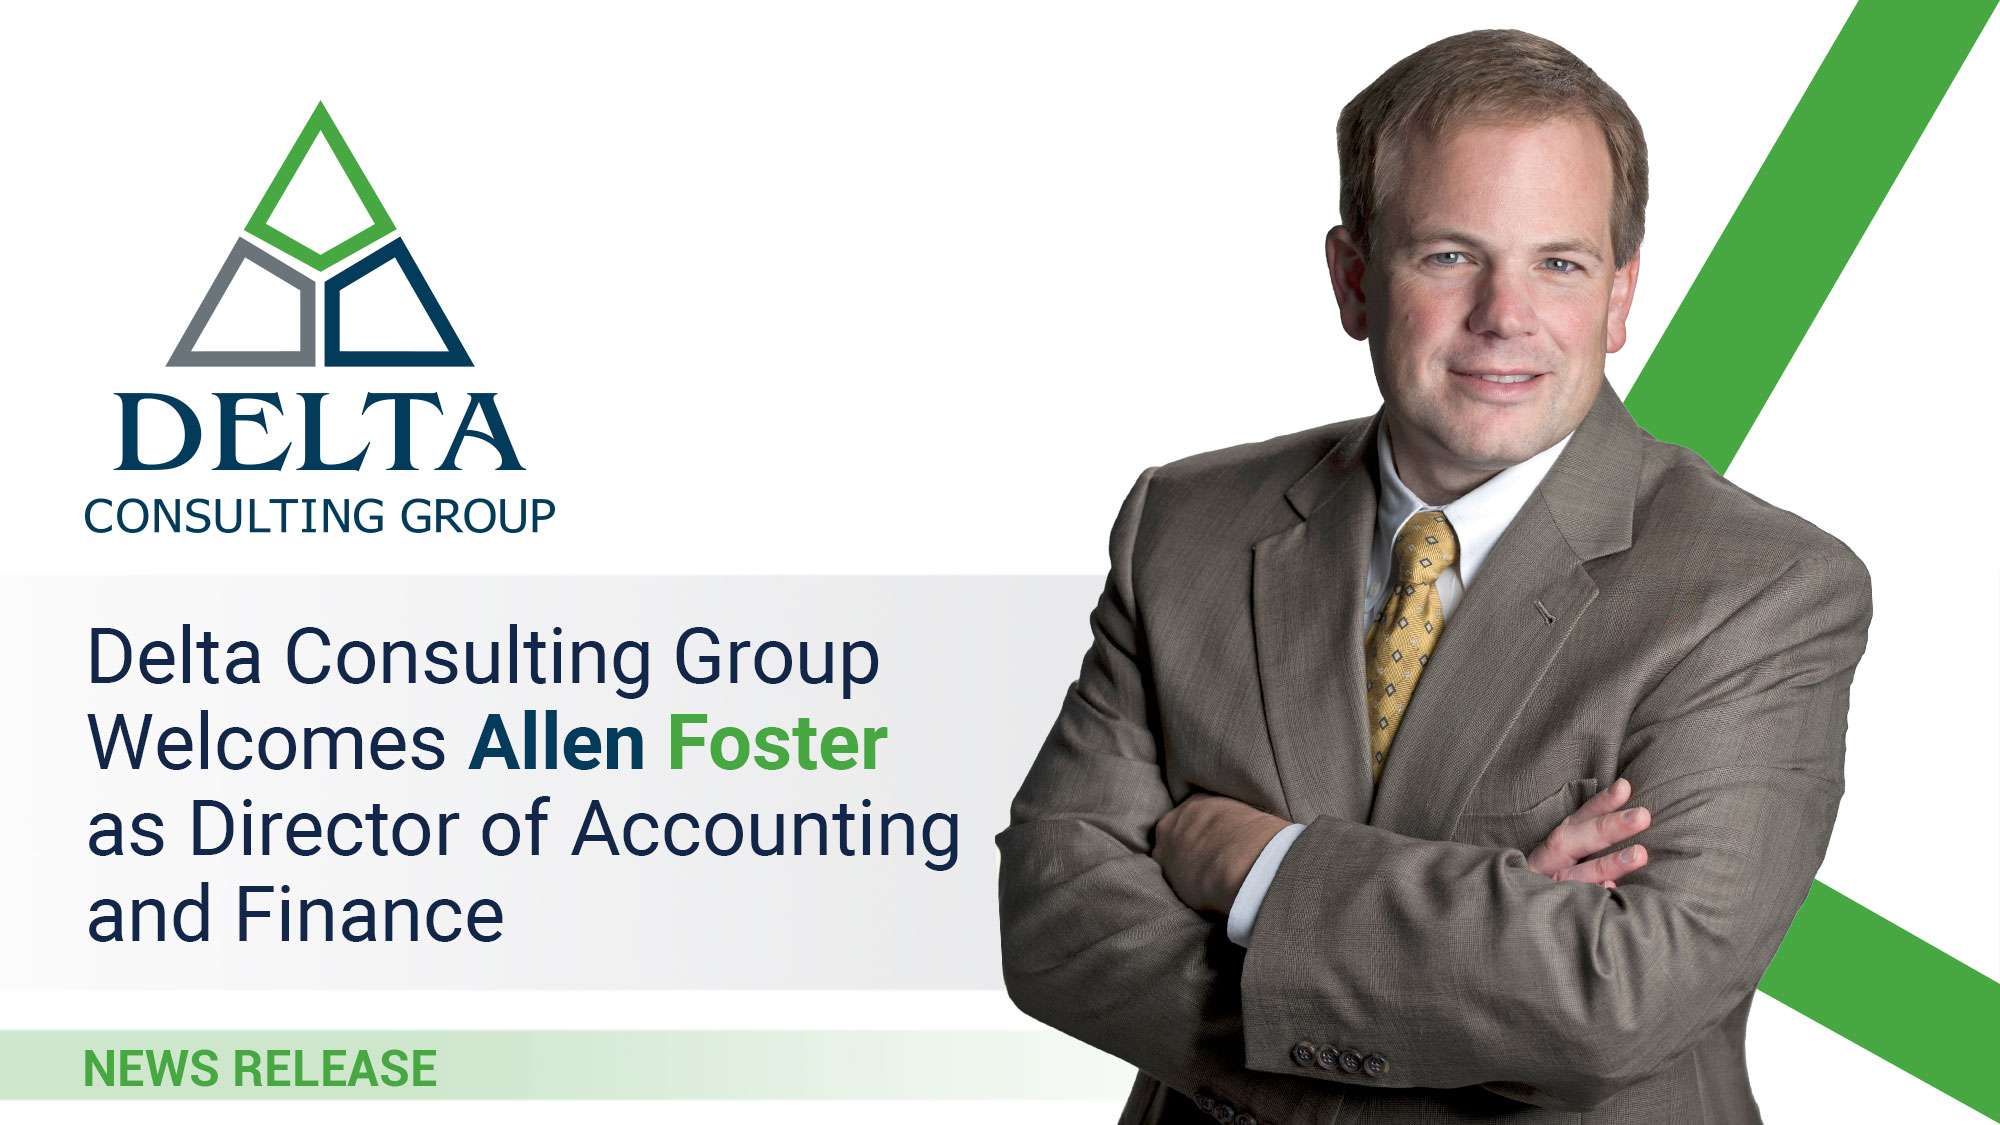 Delta Consulting Group Welcomes Allen Foster as Director of Accounting and Finance